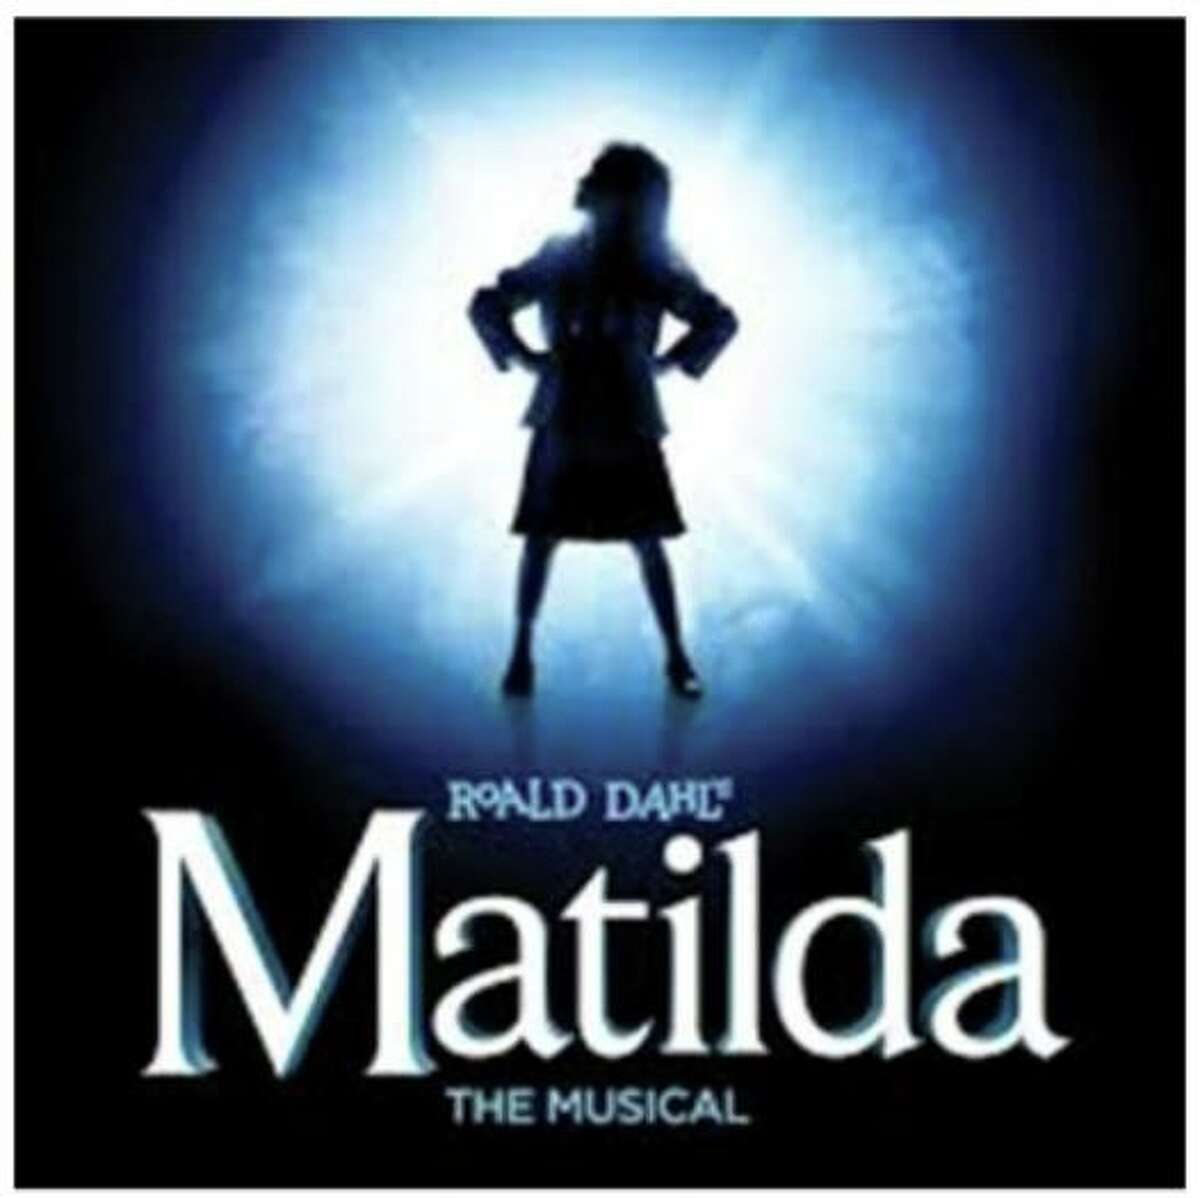 The St. Catherine’s Players will be performing “Matilda, The Musical” at St. Catherine of Siena Church in Greenwich’s Riverside section Fridays through Sundays, Feb. 28-March 8.